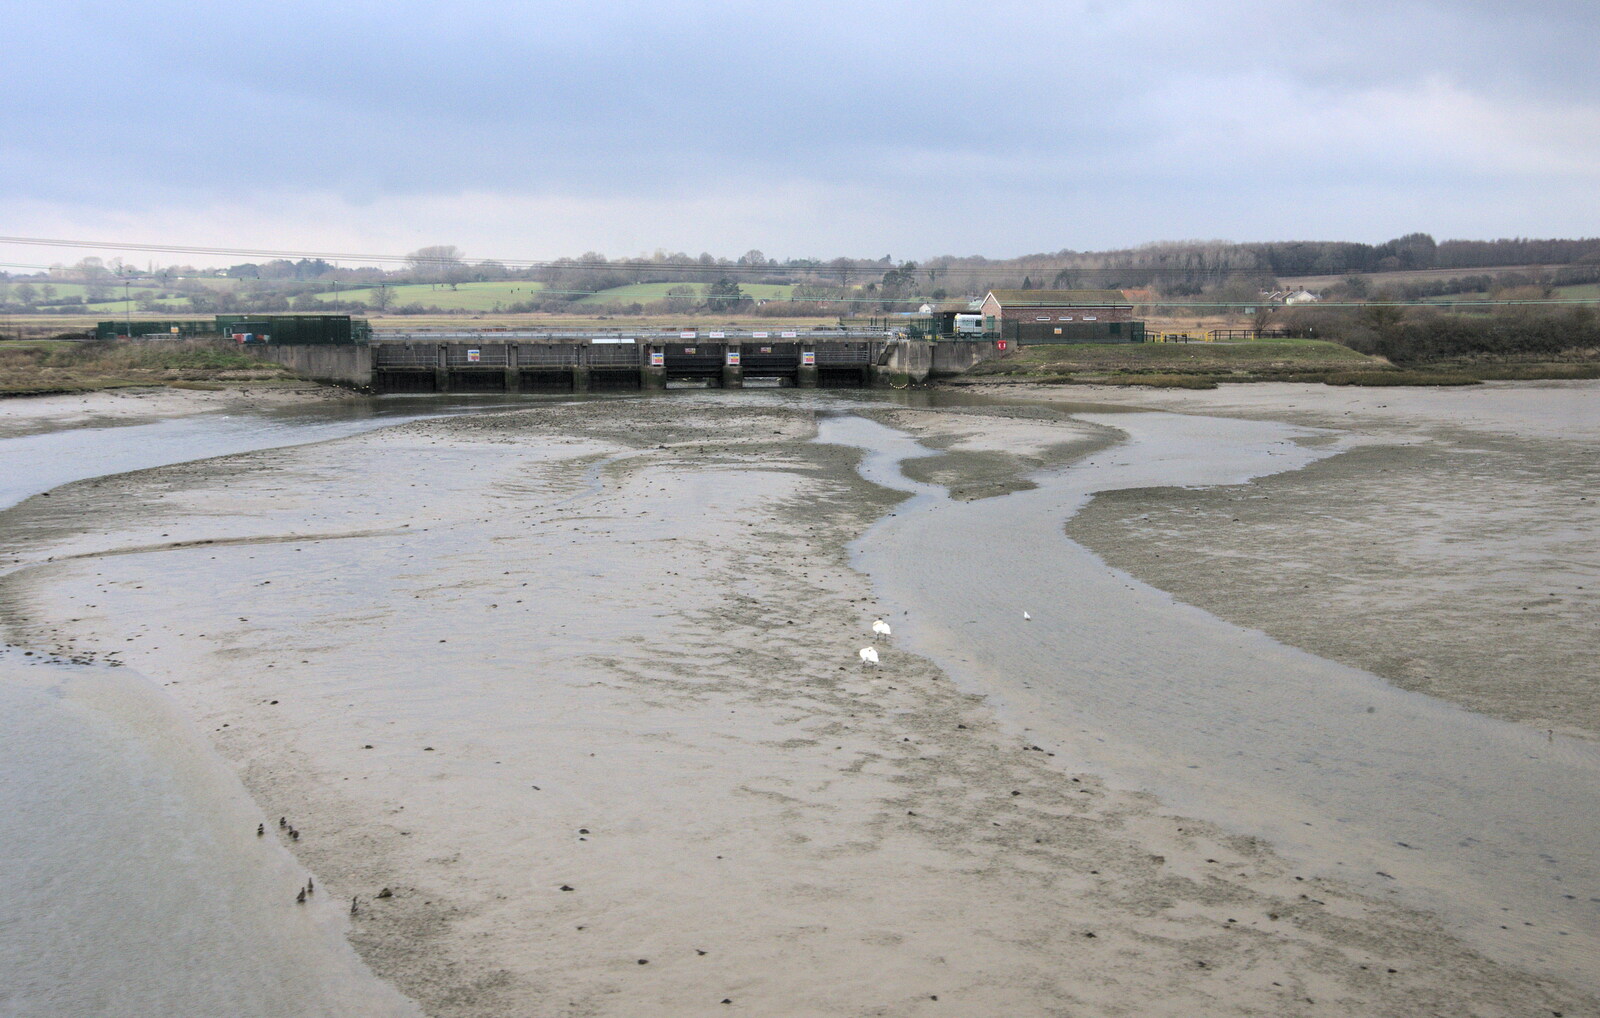 The mud flats of Brantham, near Manningtree from A Wintry Trip Down South, Walkford, Dorset - 1st February 2019